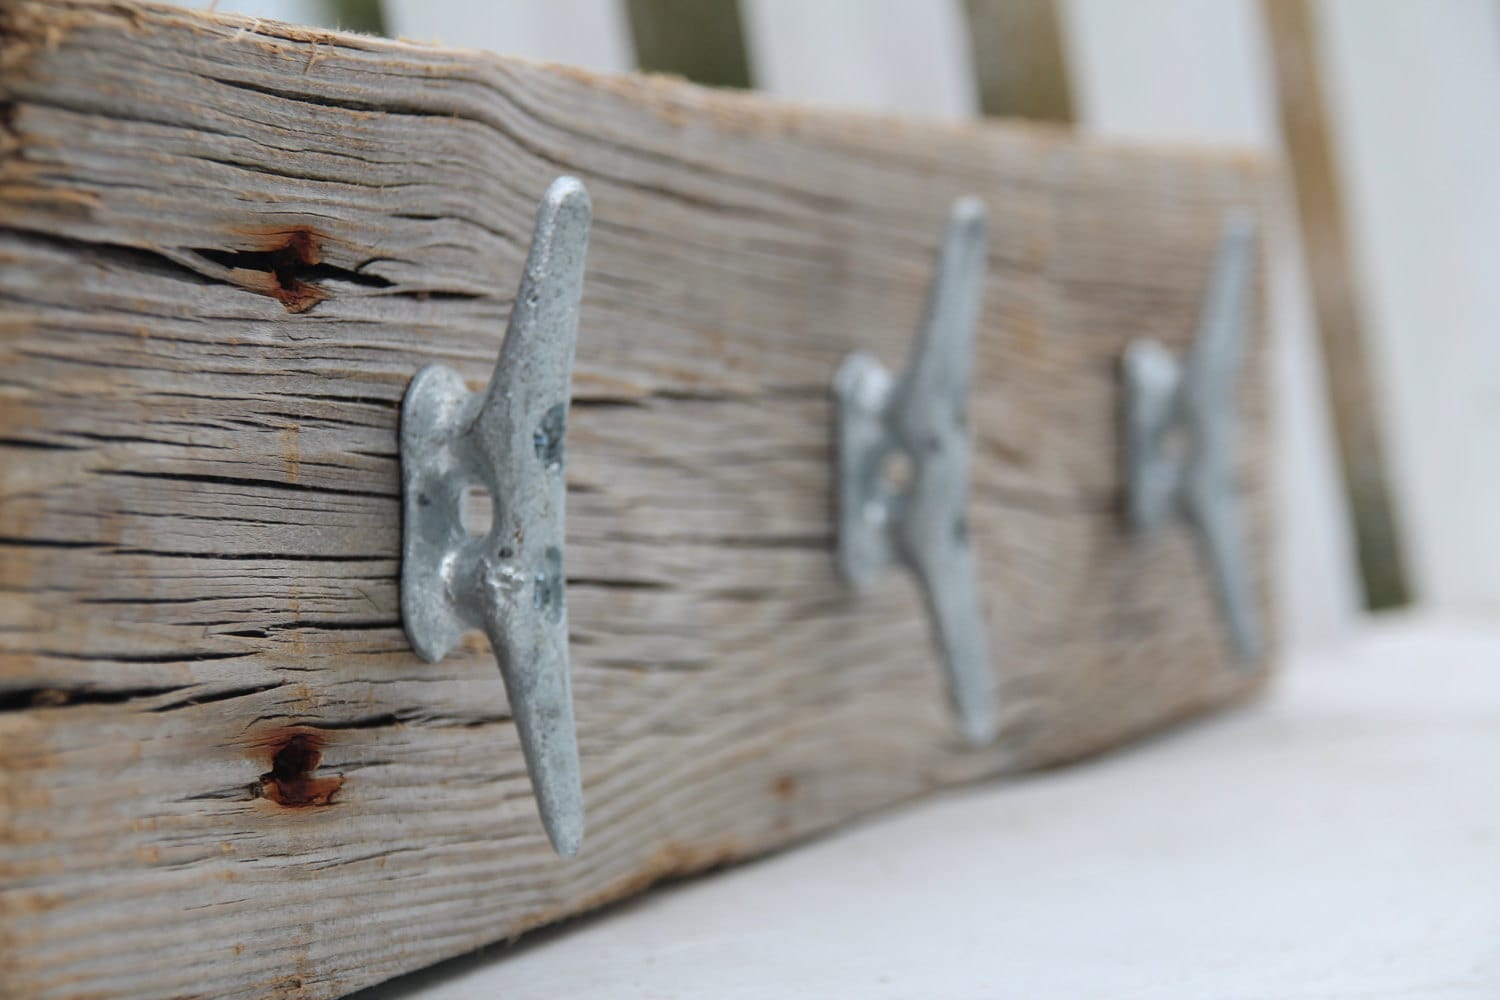 Nautical coat rack with boat cleats made from reclaimed wood